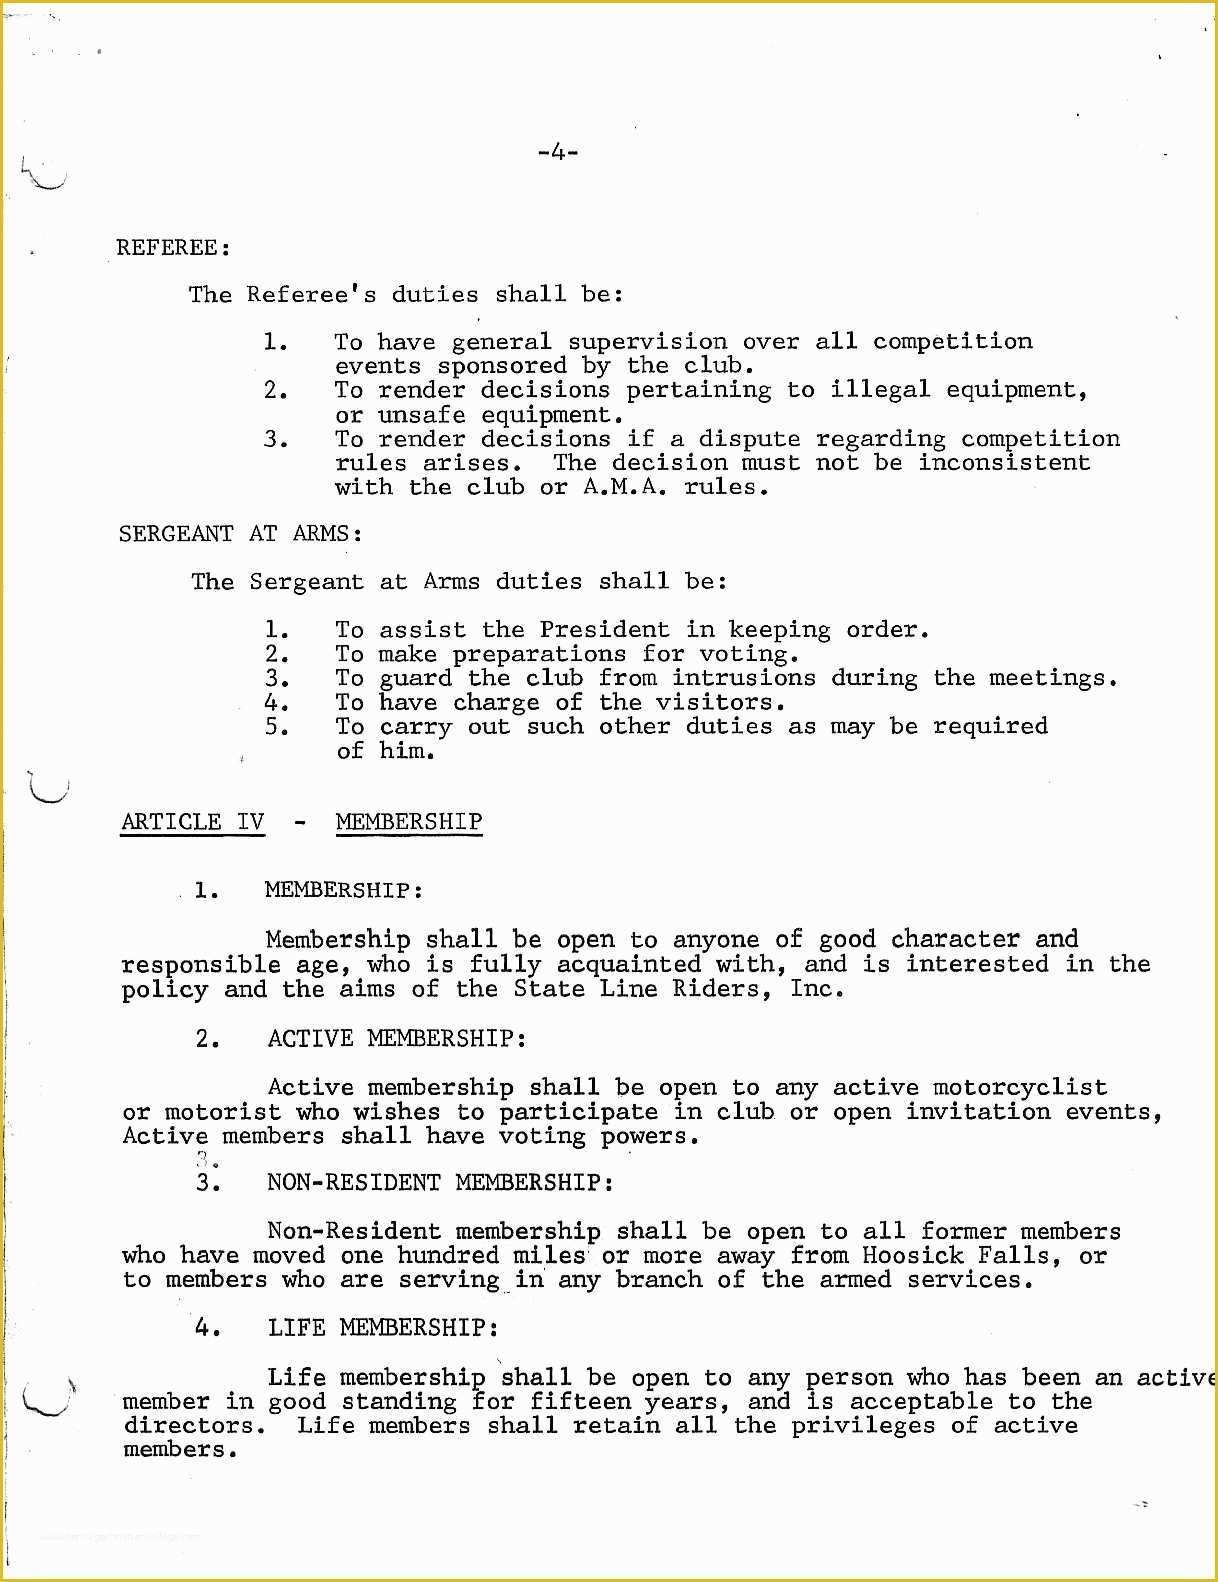 free-bylaws-template-of-stateline-riders-motorcycle-club-club-by-laws-collection